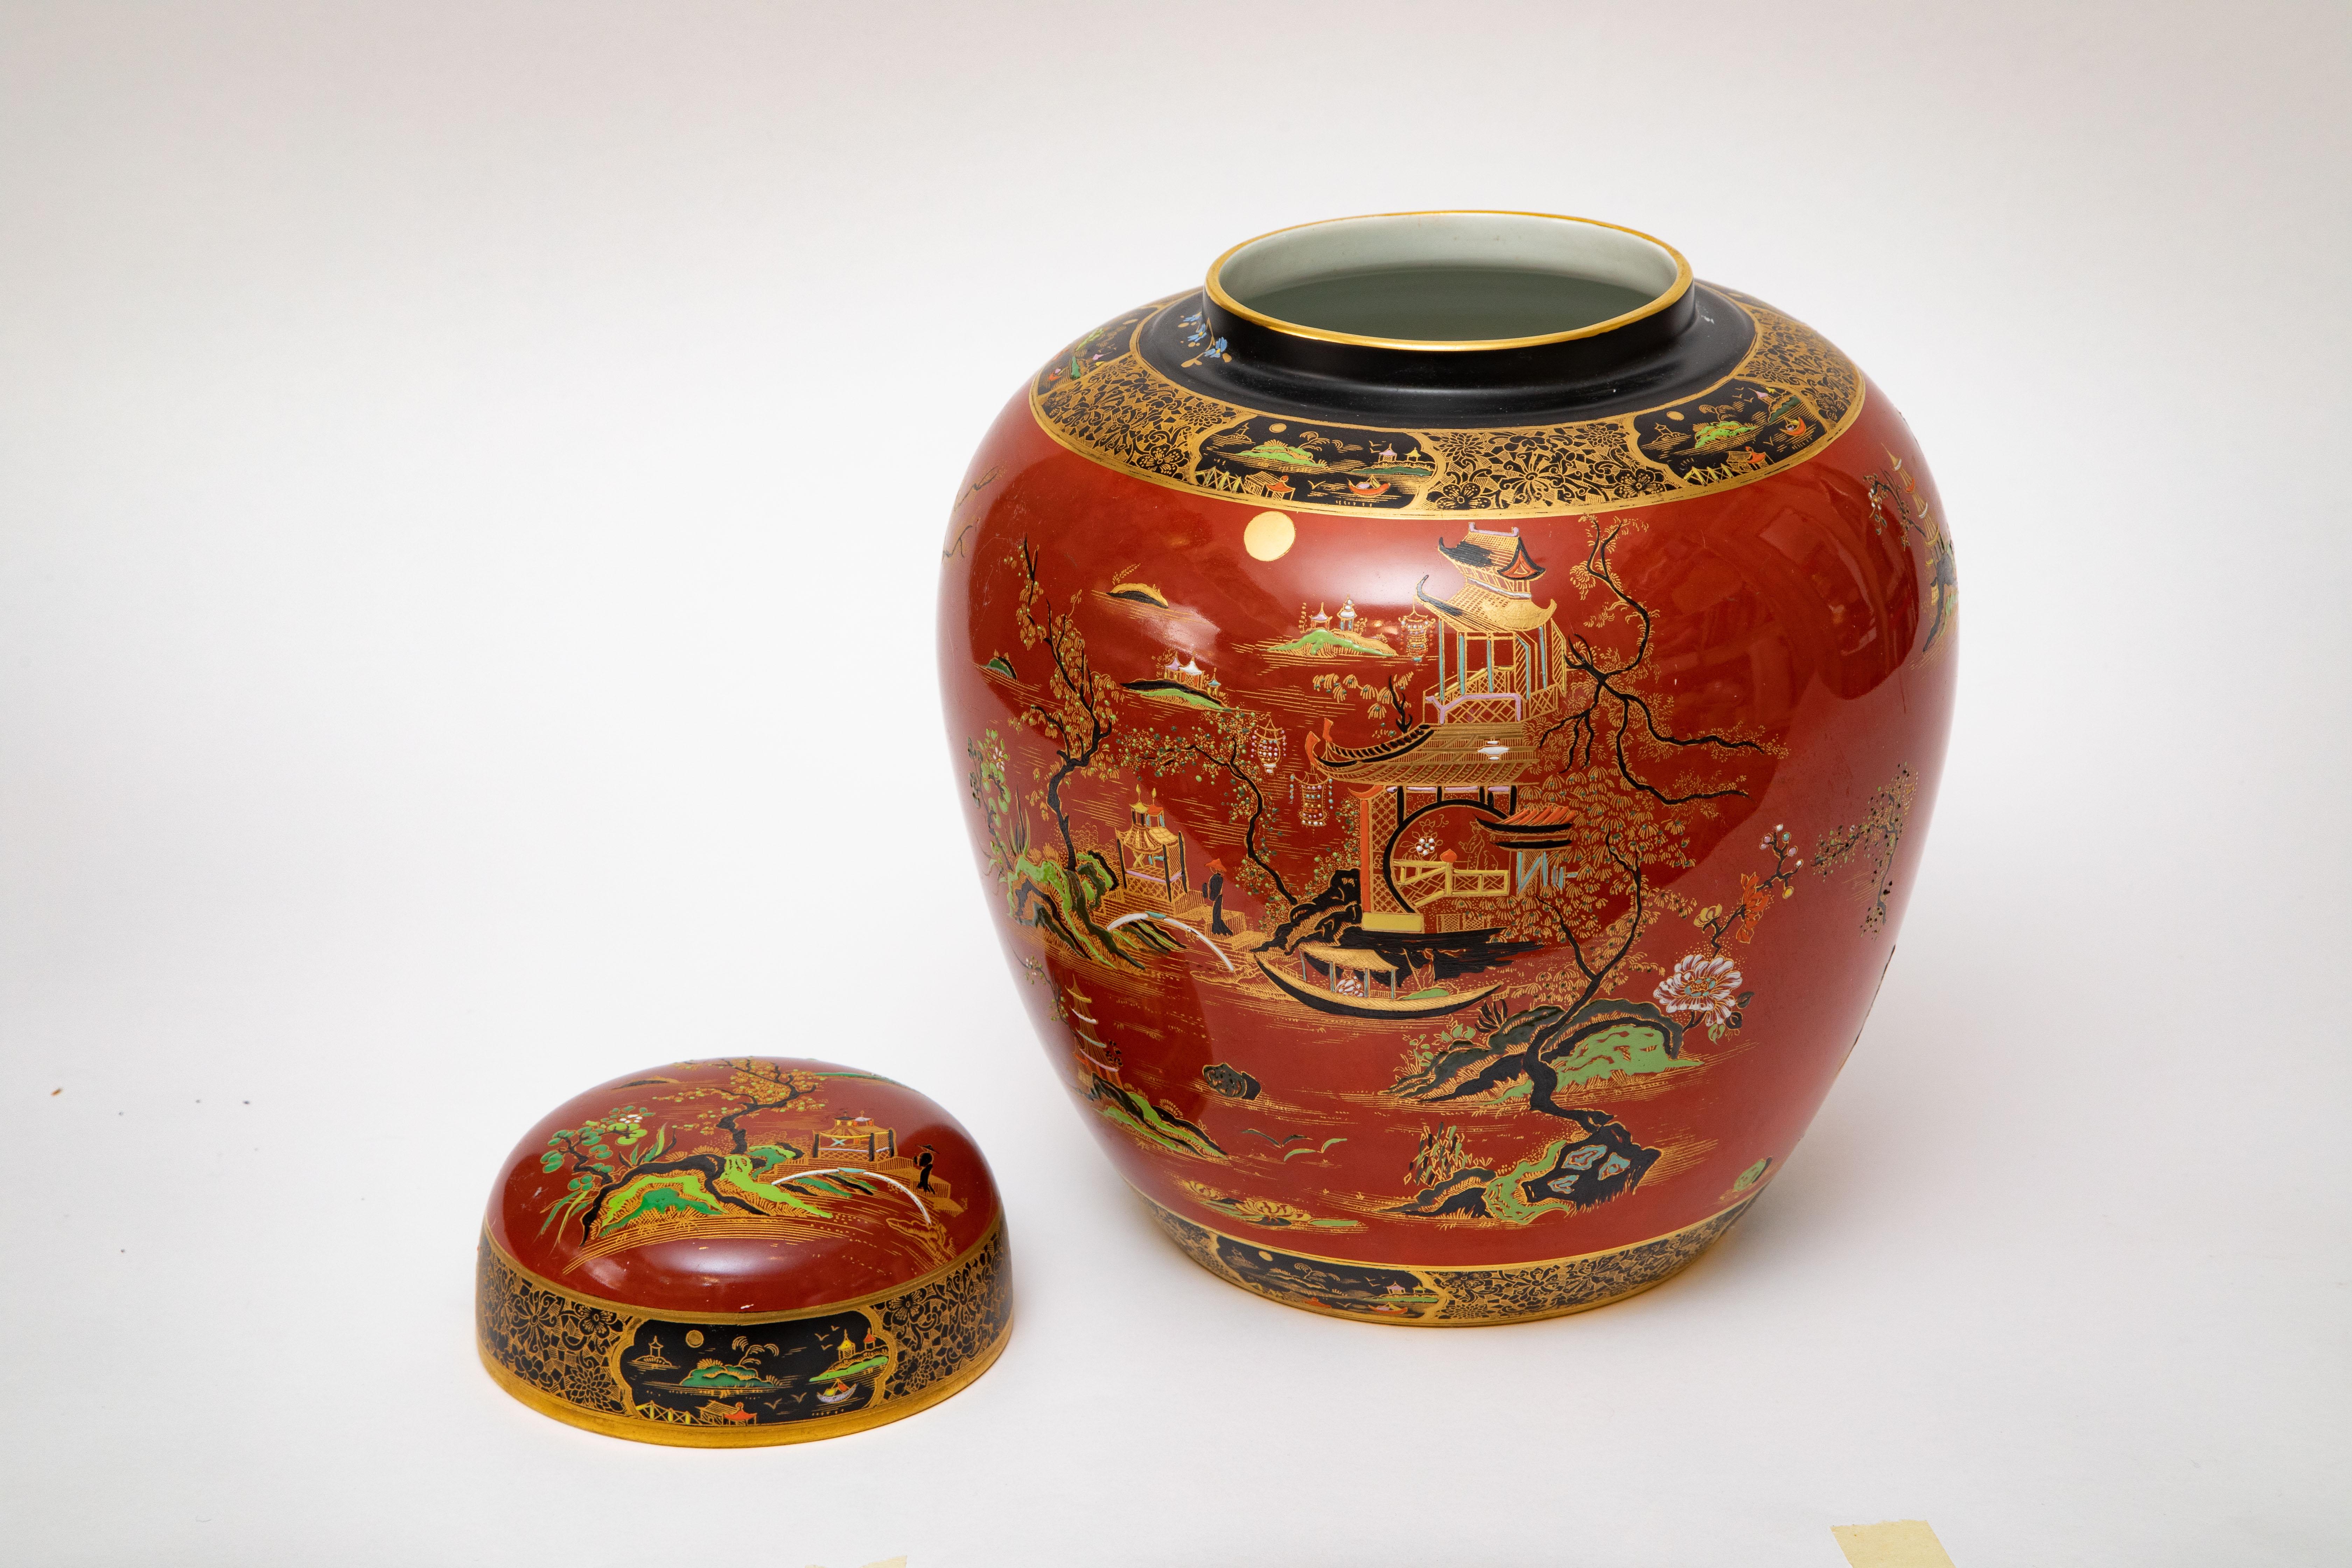 A large and impressive hand painted vase and cover from the re known studio of Carlton England. This Chinoiserie design features a variation of the Willow on a burnt orange background accented with black rims, bright greens and of course 24 karat